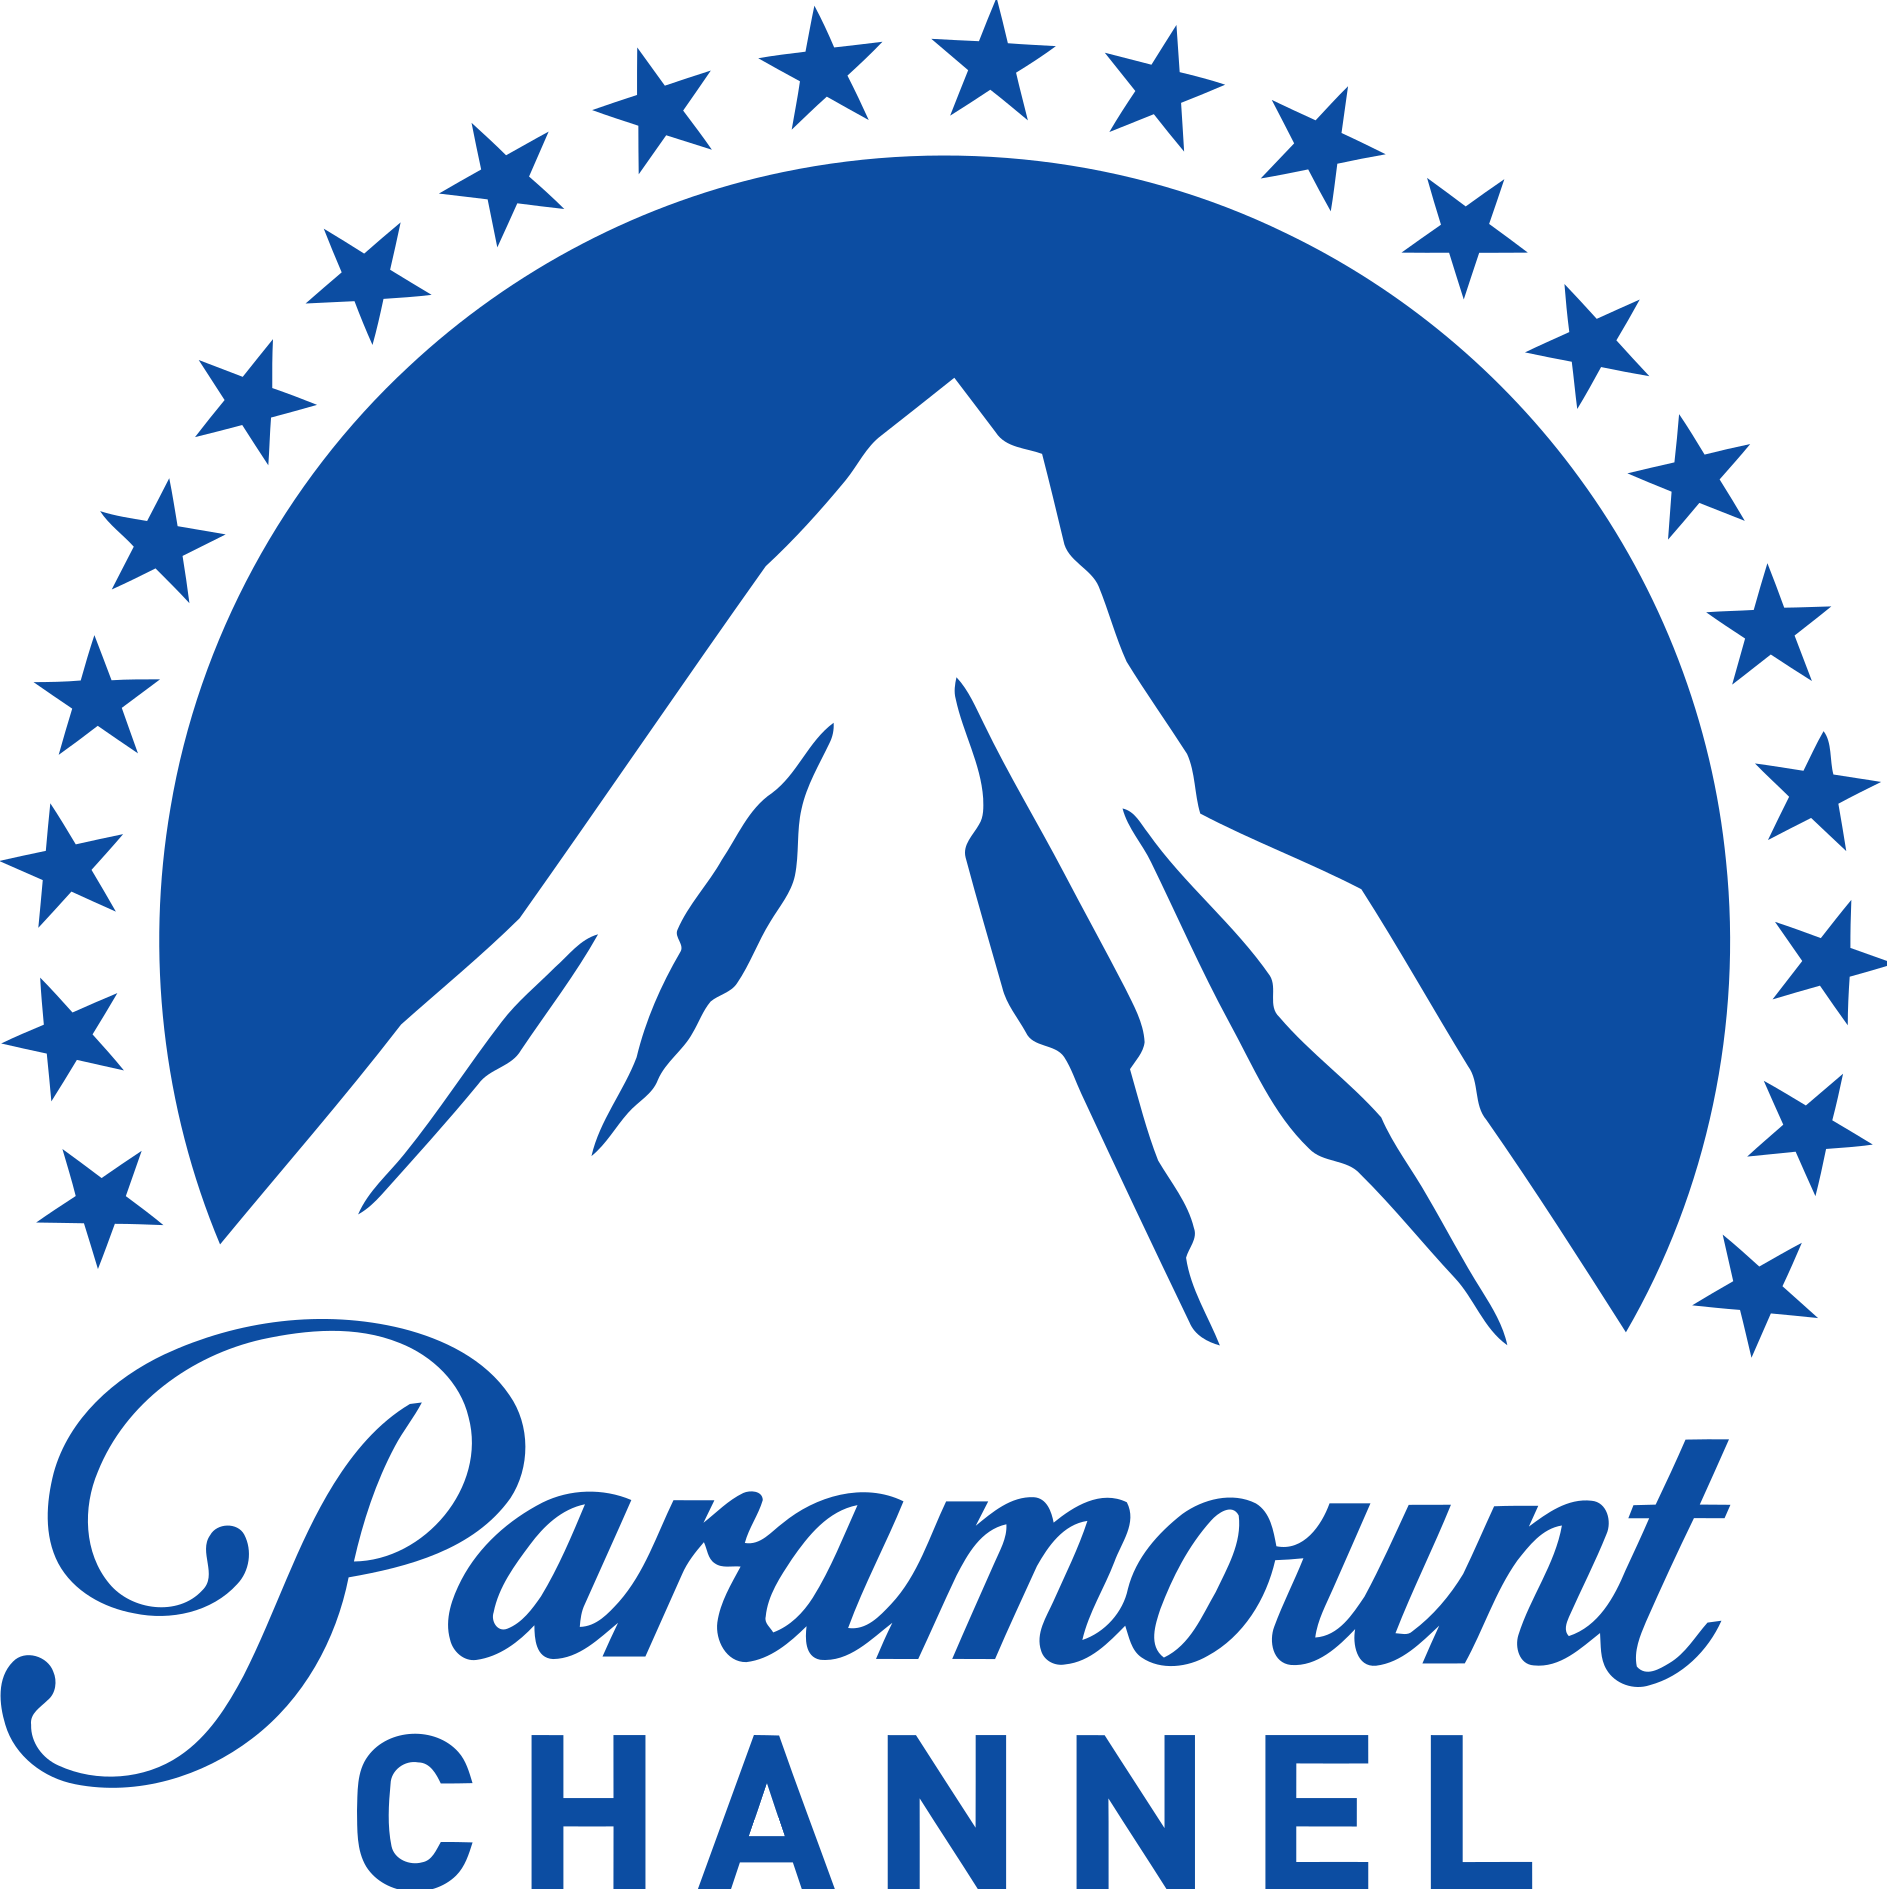 paramount channel